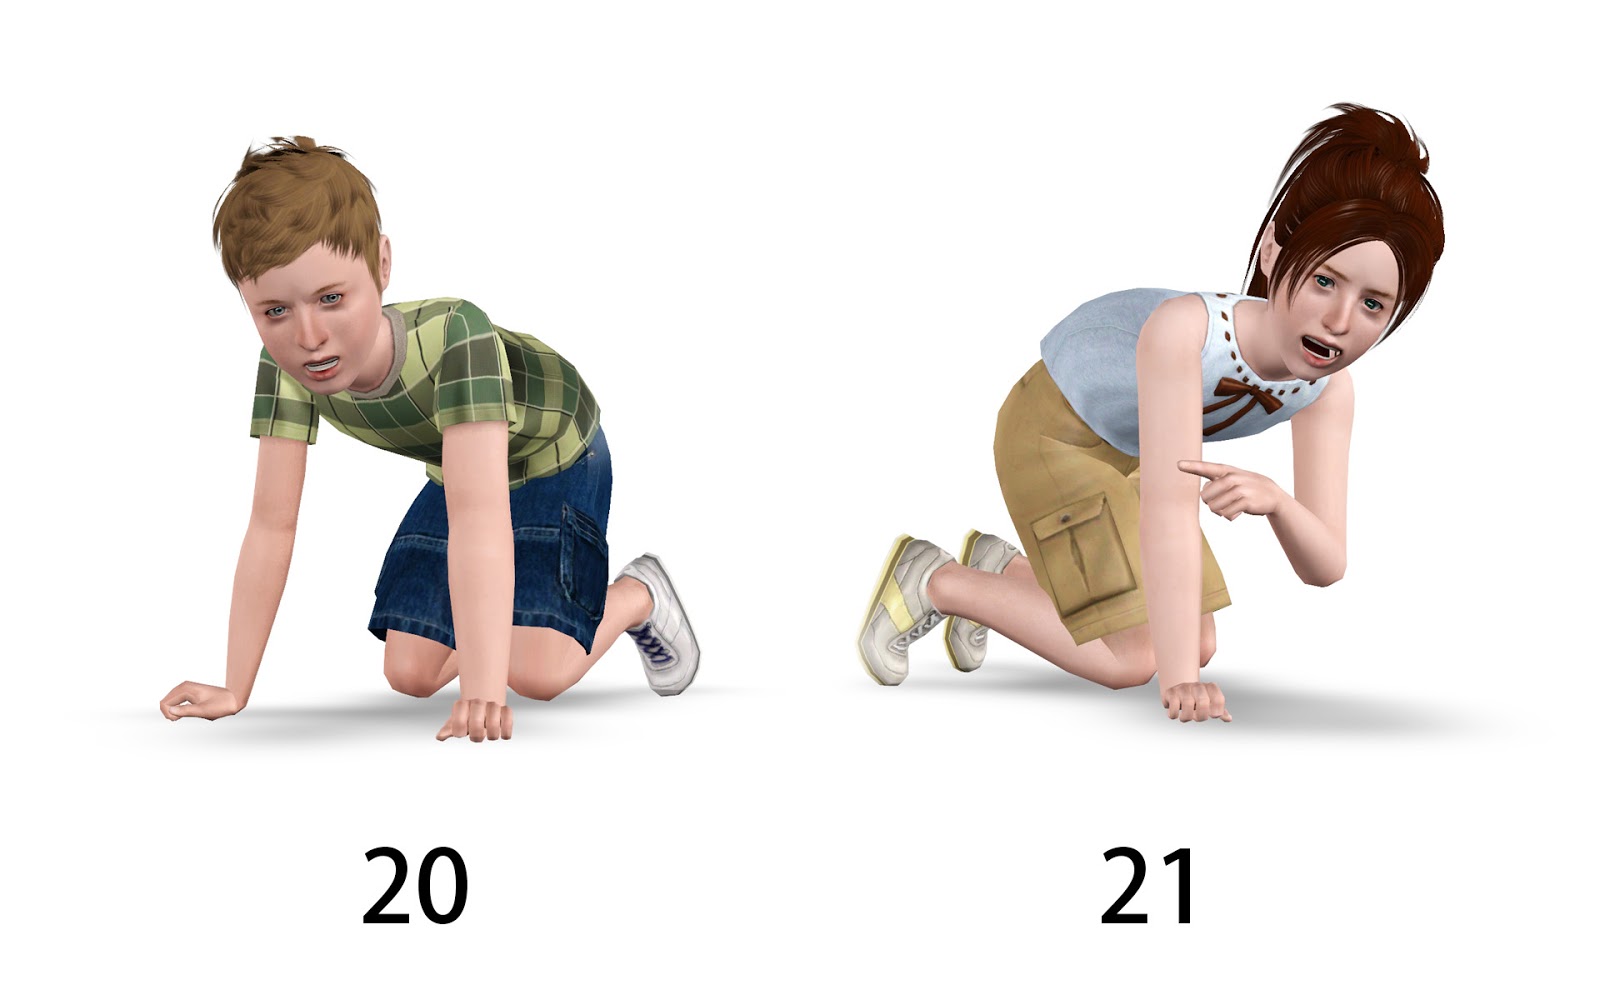 How to Do the Childs Pose in Yoga - dummies